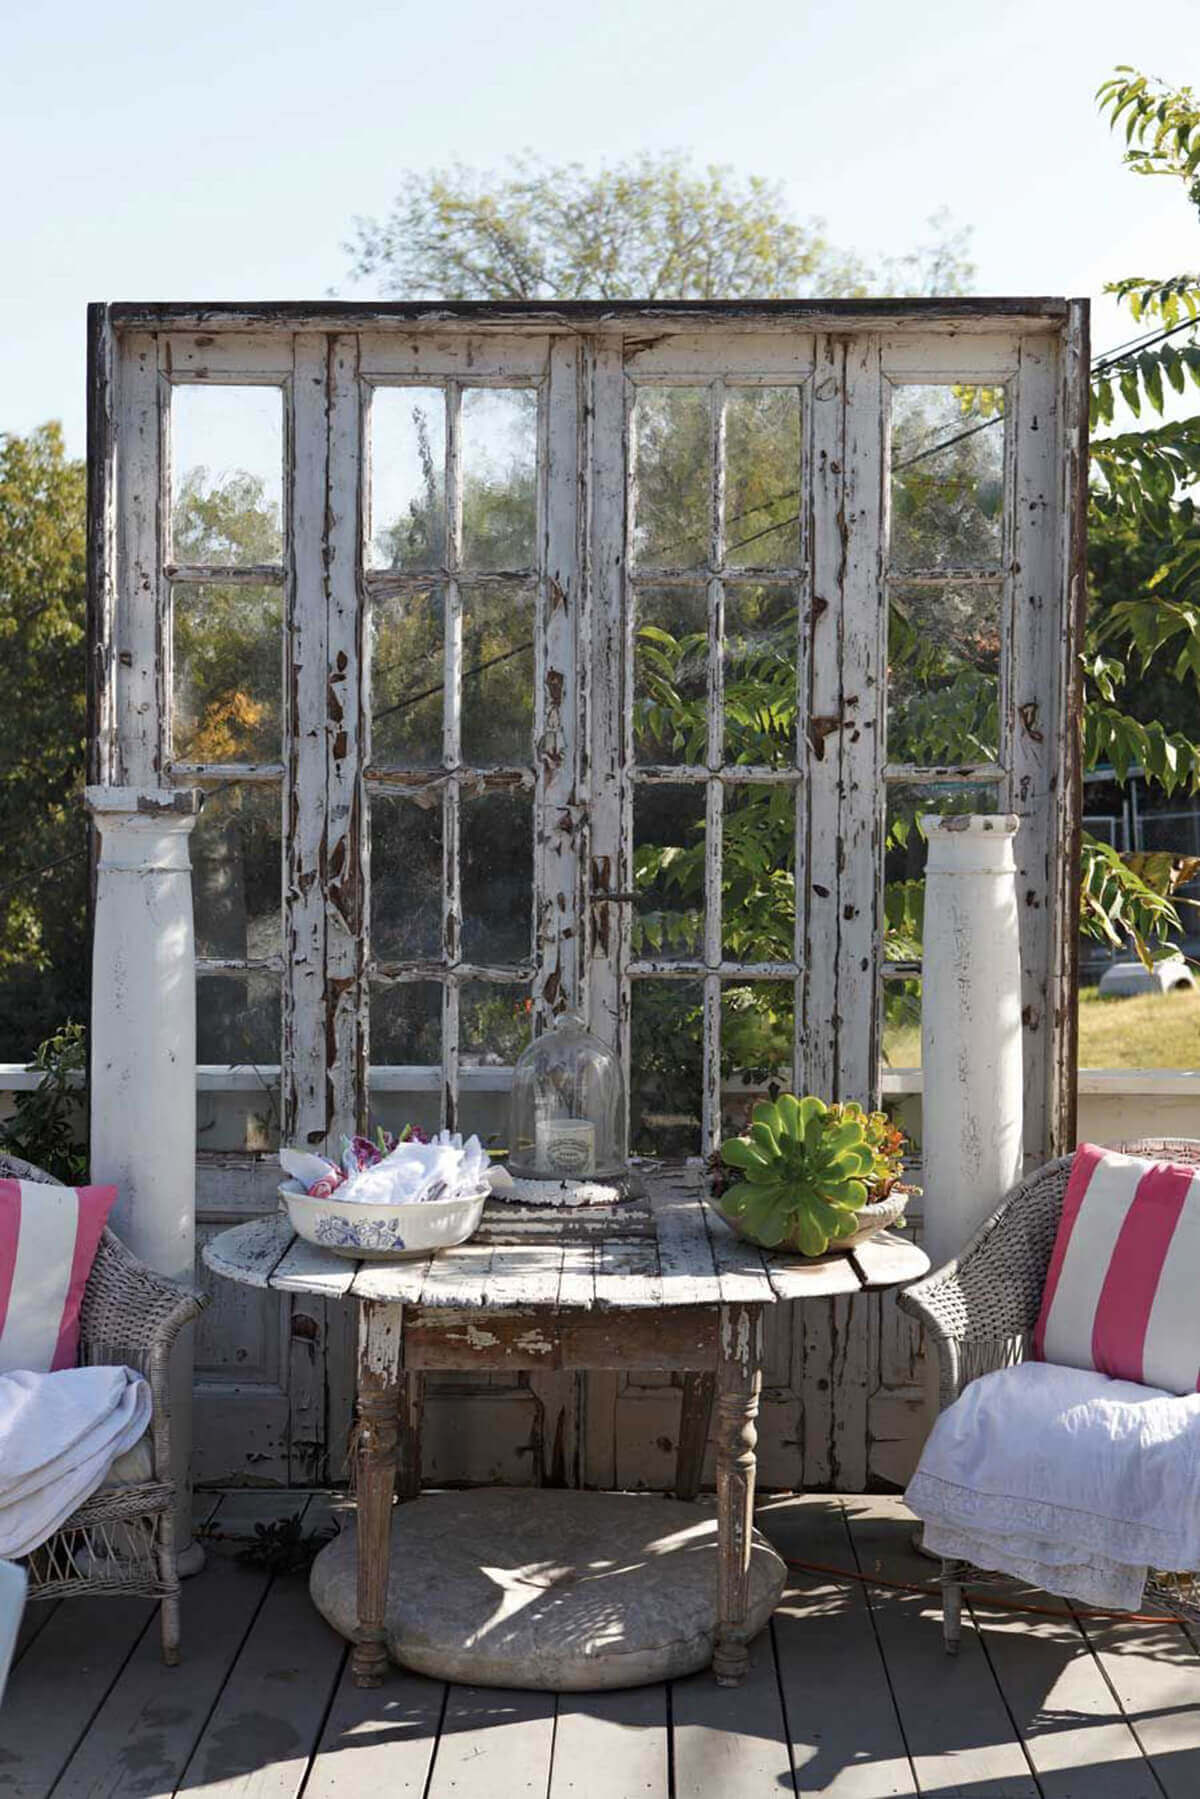 Weathered French Doors as a Backdrop | Creative Repurposed Old Door Ideas & Projects For Your Backyard